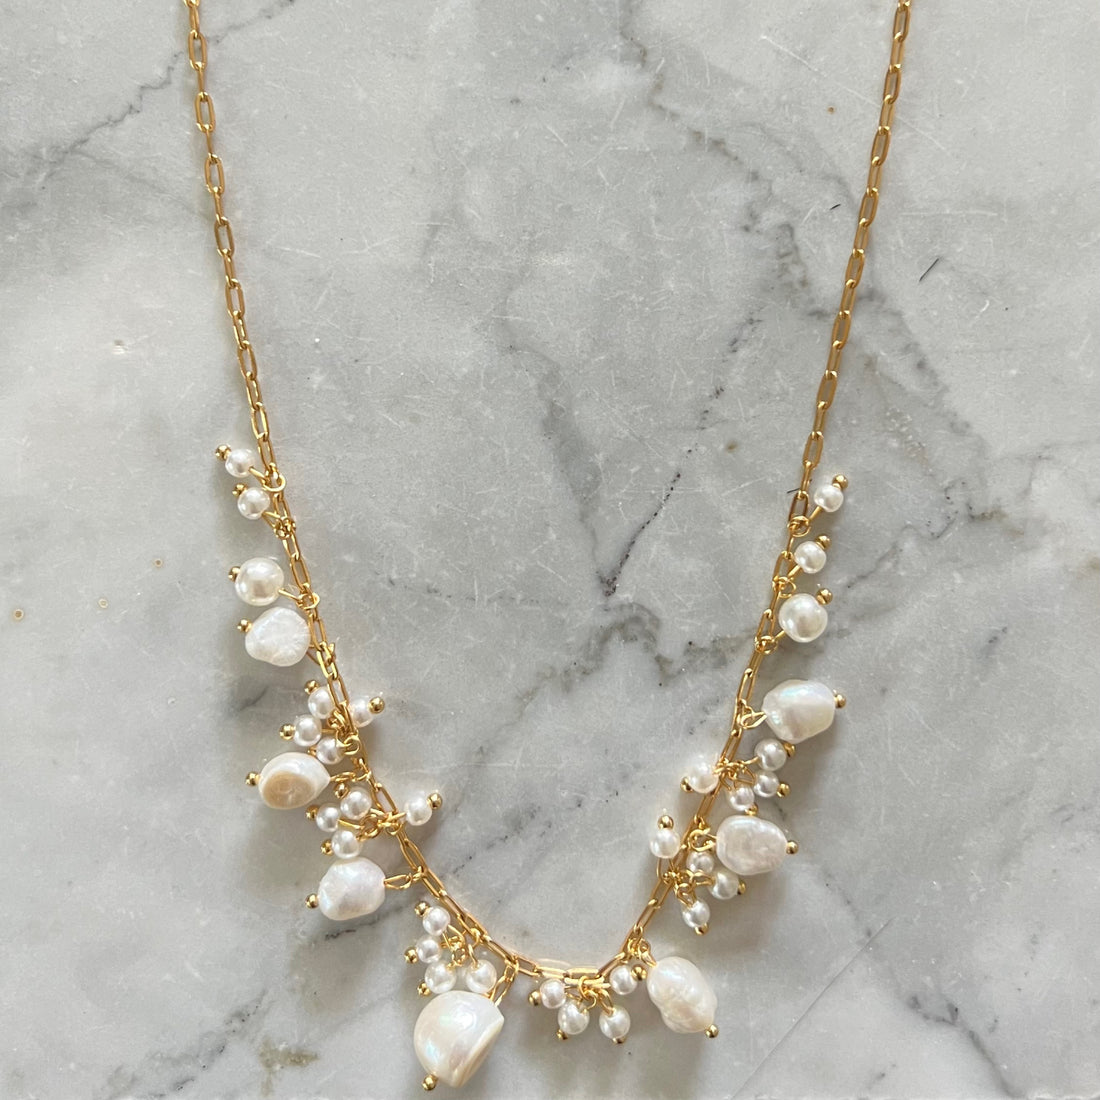 Sea of pearls necklace